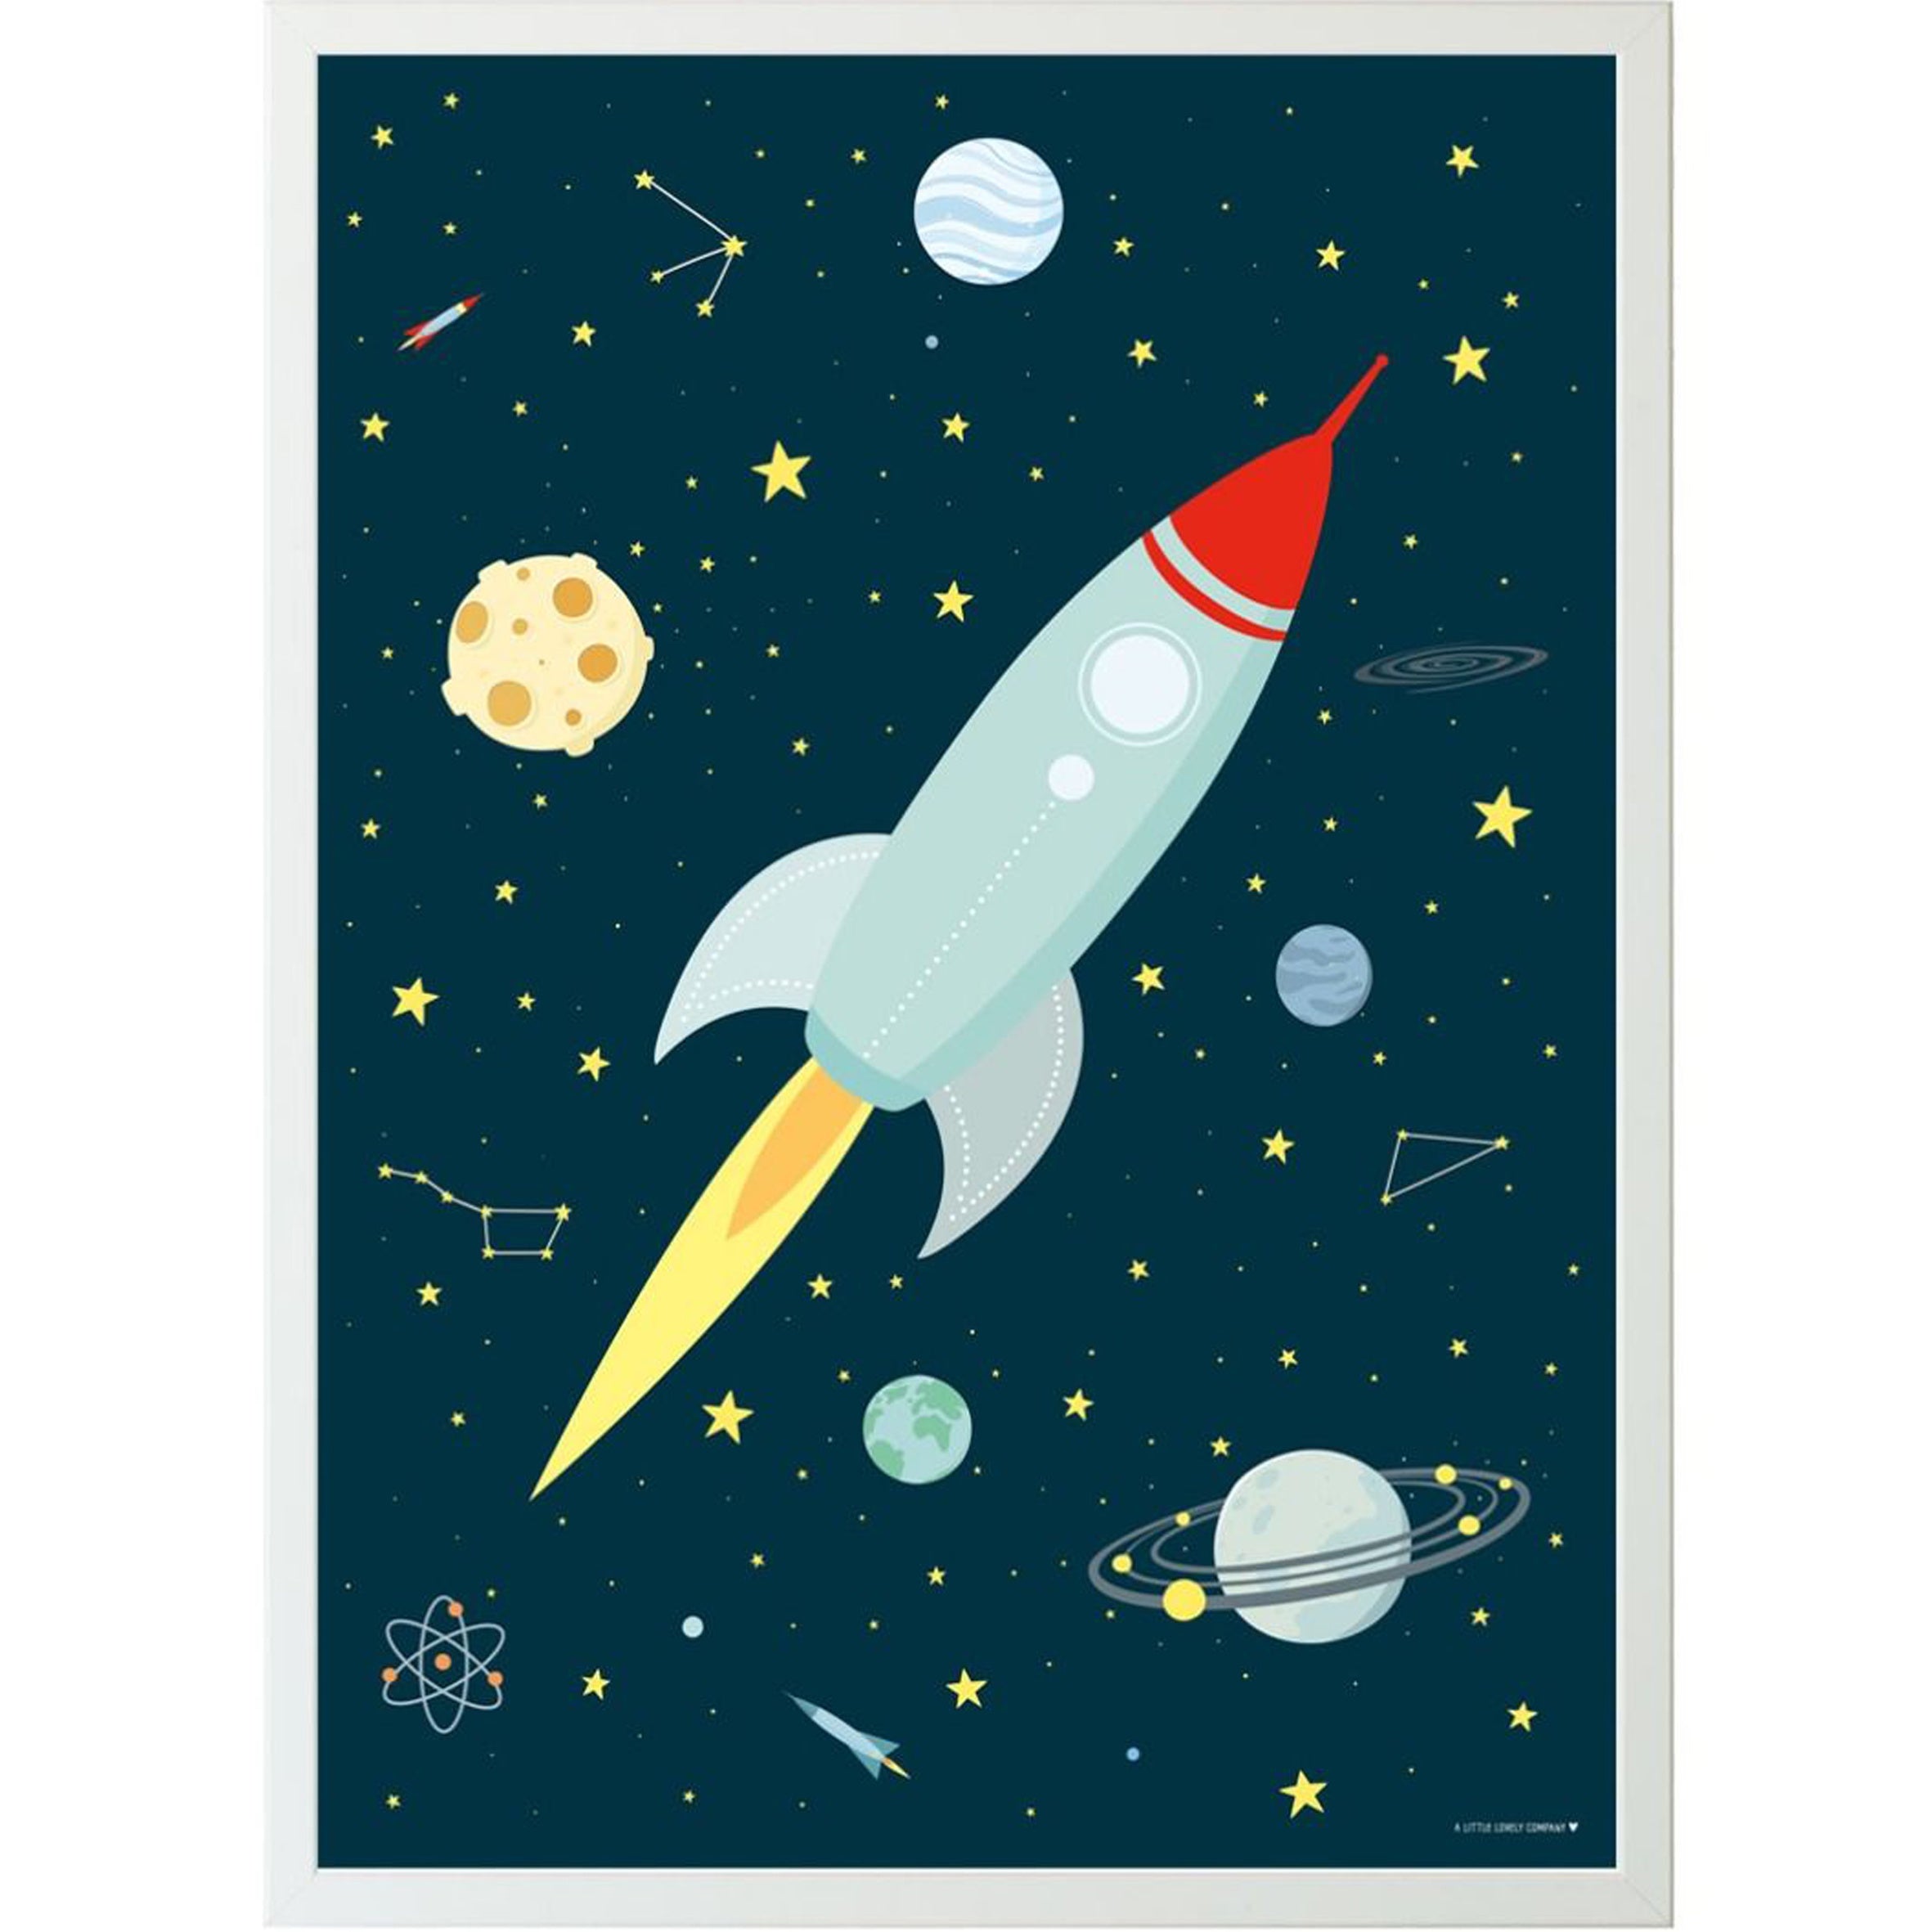 Deer Industries Poster Rocket A little lovely company. Space ship, moon and star, galaxy wall decor for nursery, play area or kids bedroom.